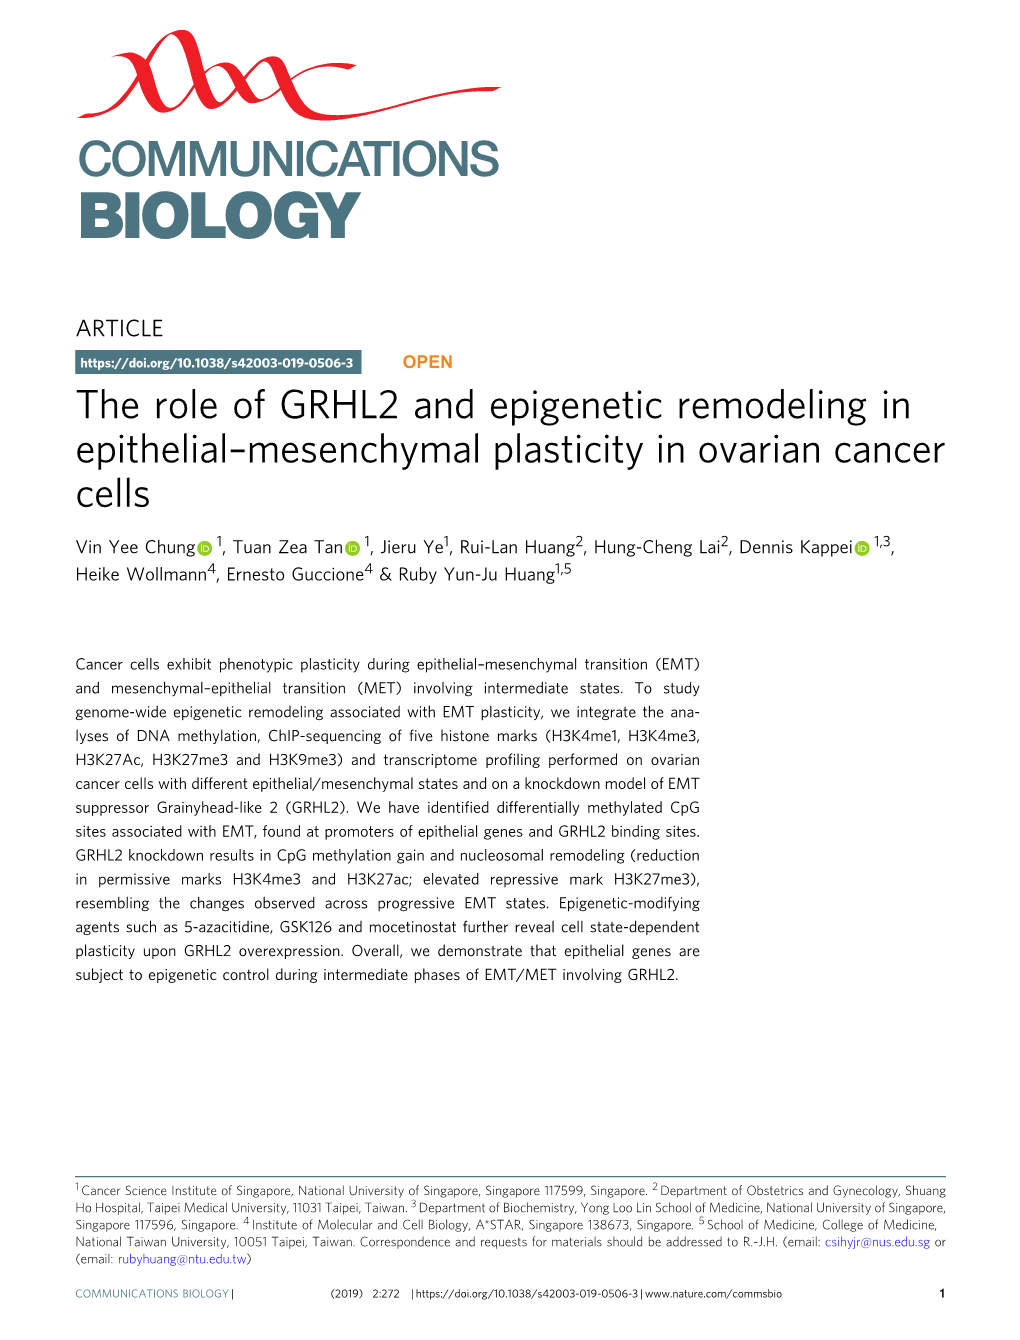 The Role of GRHL2 and Epigenetic Remodeling in Epithelialâ€“Mesenchymal Plasticity in Ovarian Cancer Cells